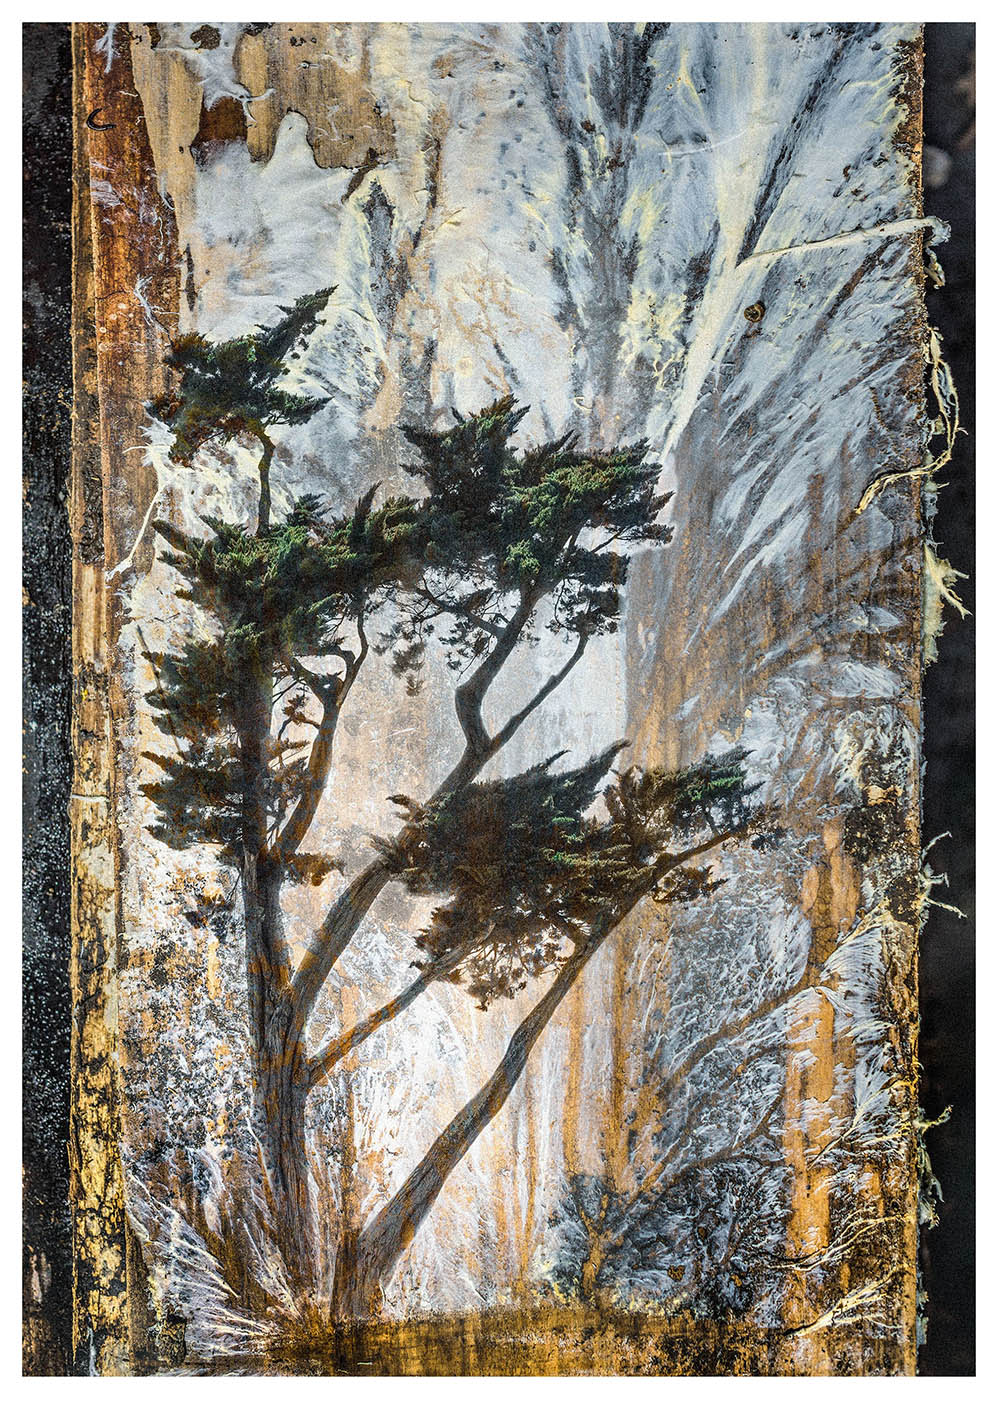 Photographed white wood fungus with an overlaid pine tree make this composite photograph form a new landscape prehaps a little Japanese in style